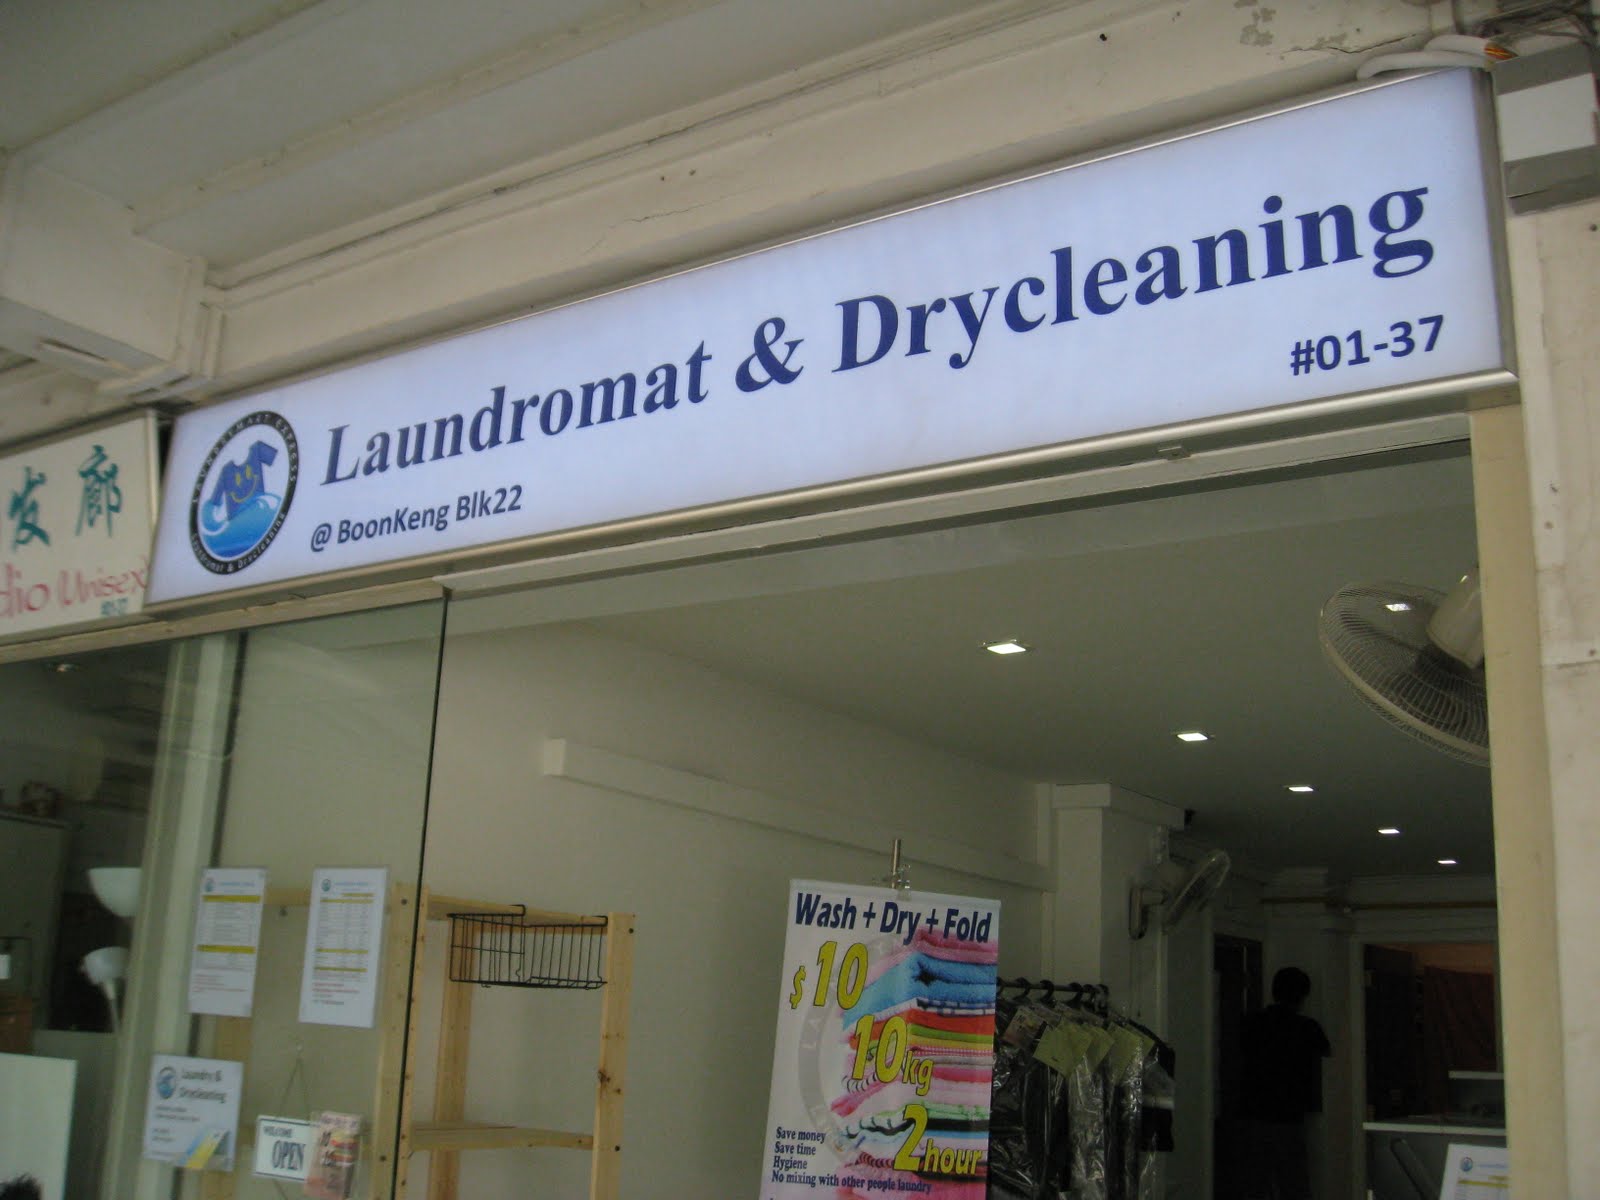 24 hour Laundromat & Drycleaning in Singapore: 24 hour laundromat shop in the central area of ...